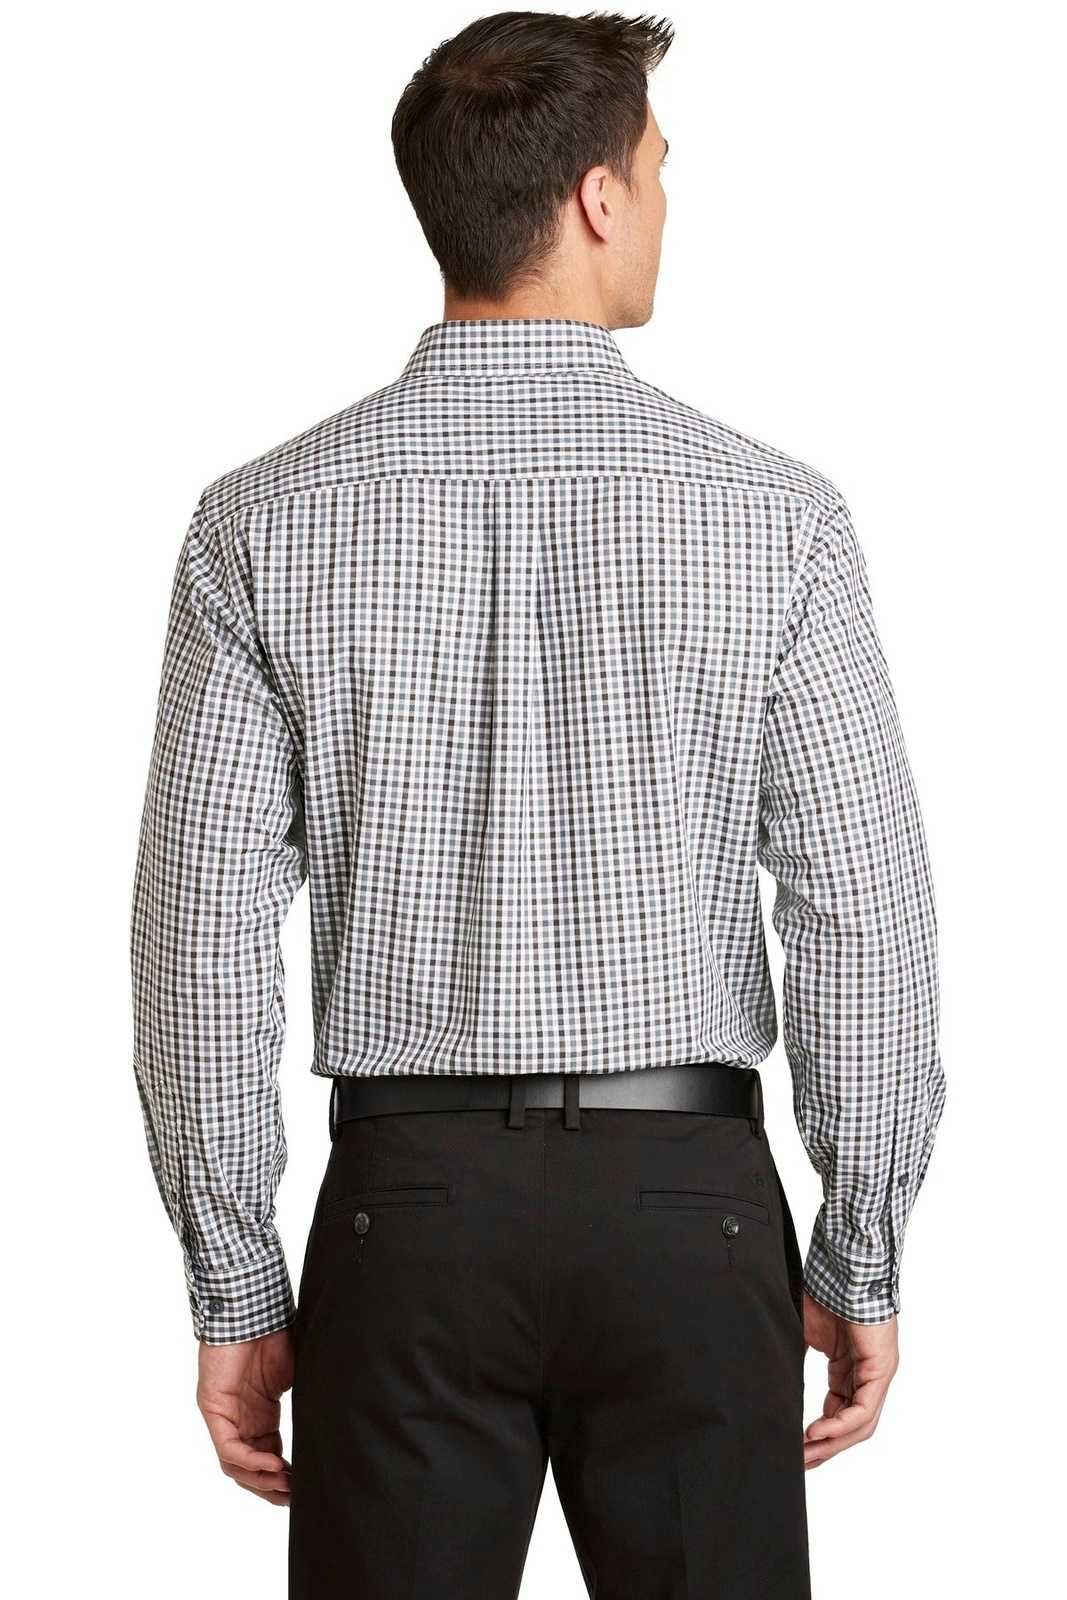 Port Authority S654 Long Sleeve Gingham Easy Care Shirt - Black Charcoal - HIT a Double - 2